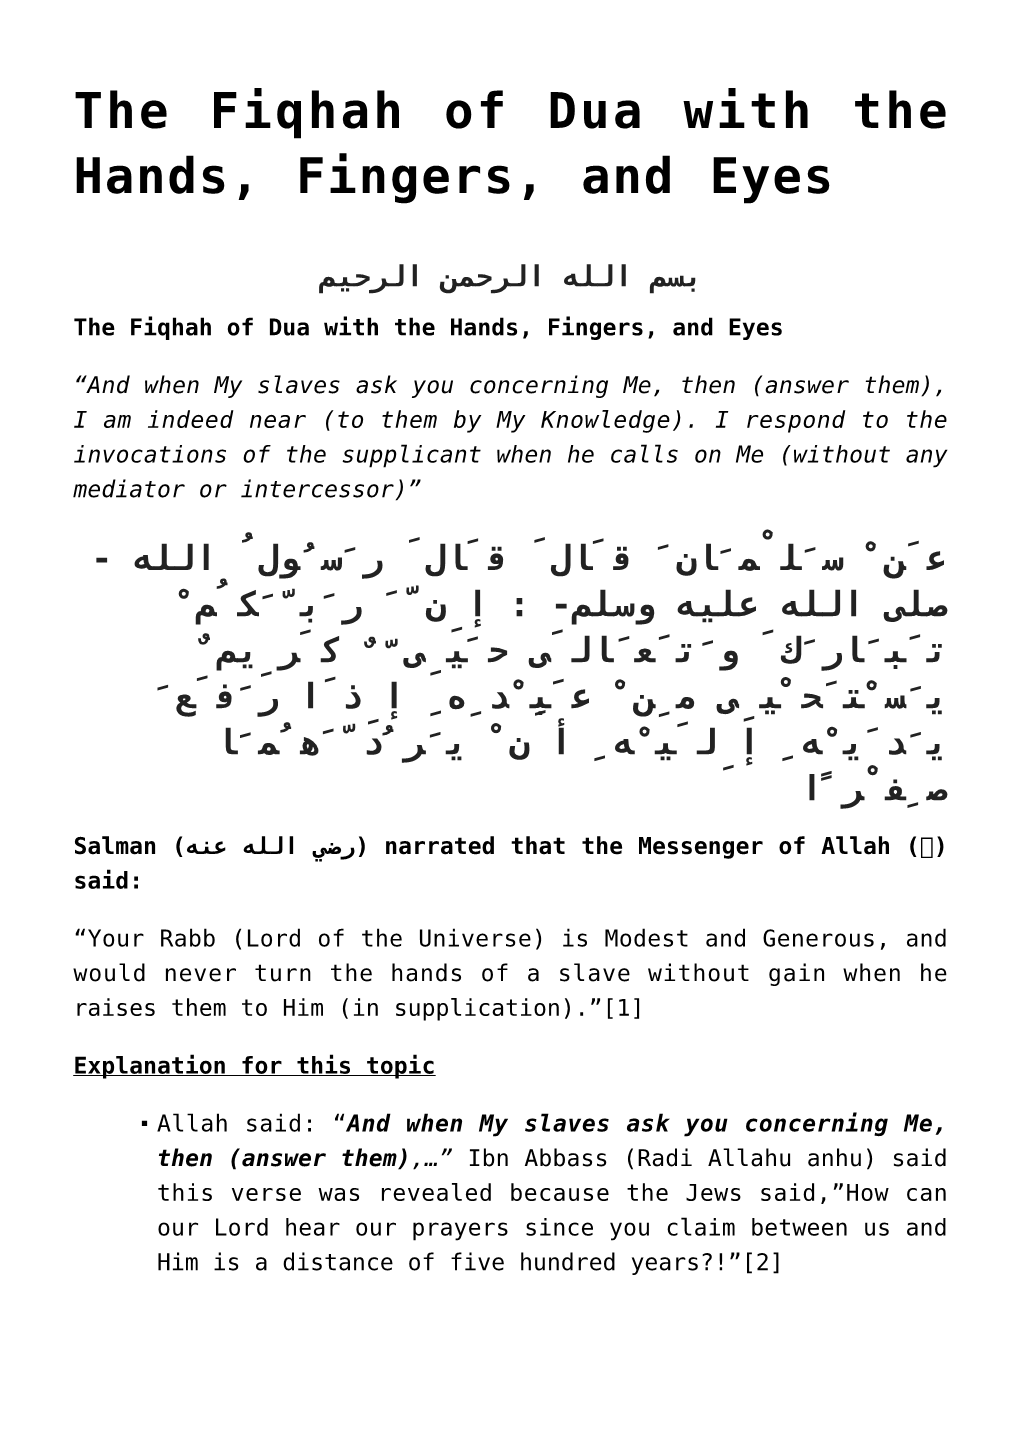 The Fiqhah of Dua with the Hands, Fingers, and Eyes